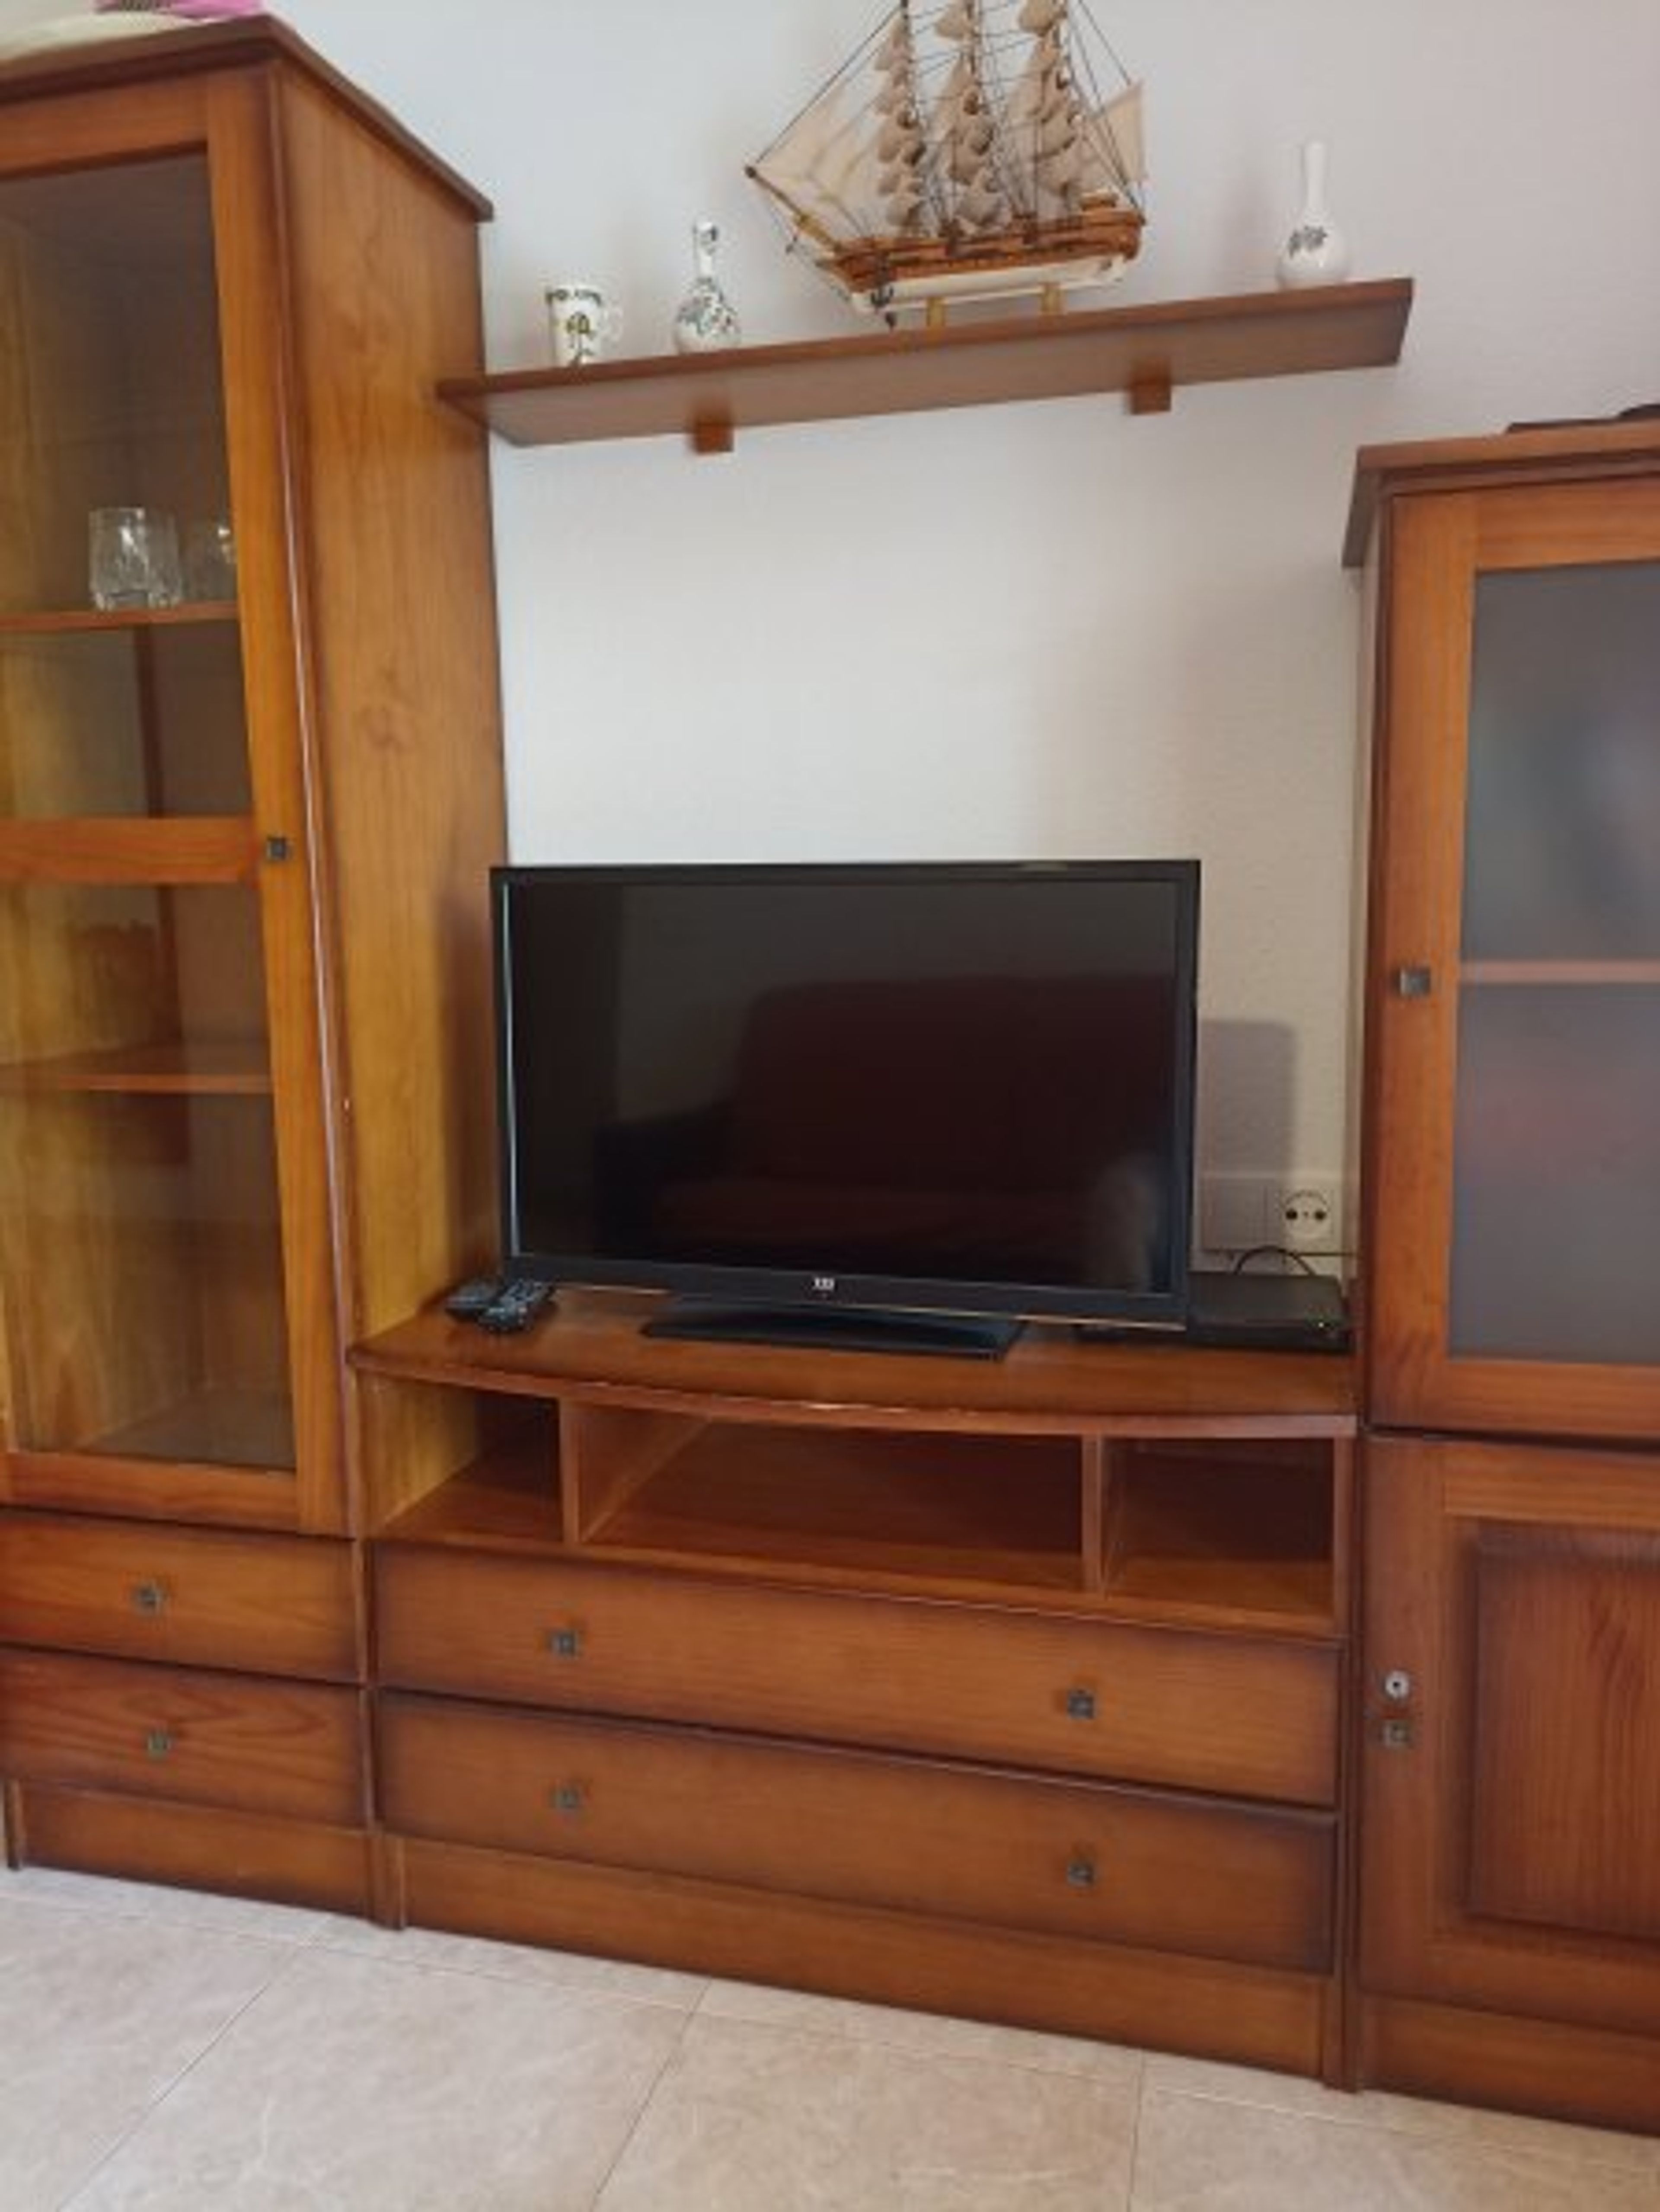 32" Flat Screen TV with UK channels.
